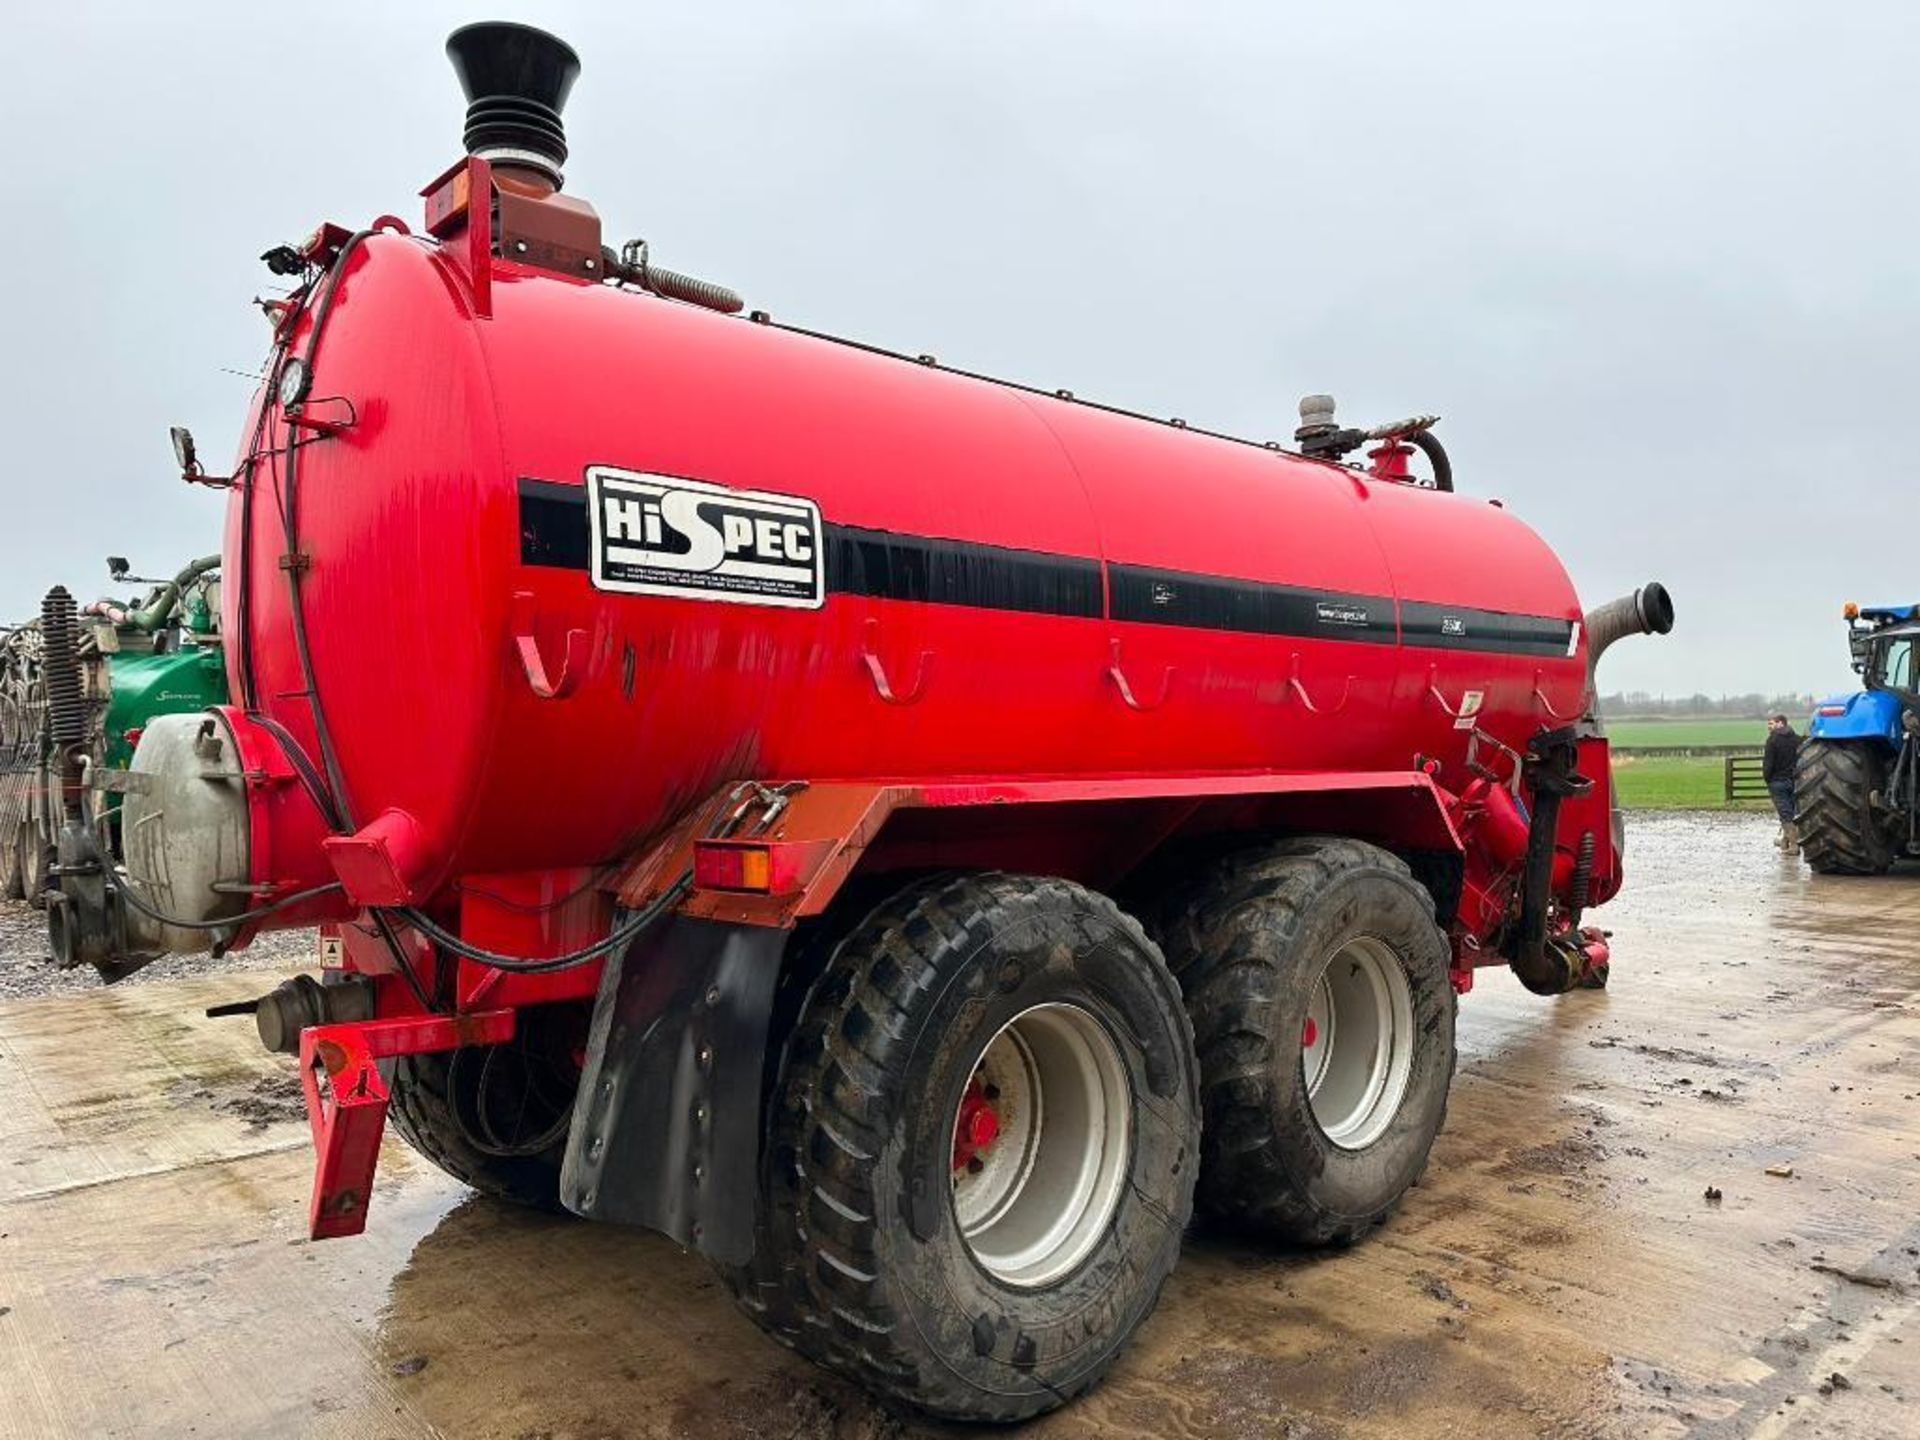 2017 HiSpec TDS 3500 twin axle 3,500 gallon slurry tanker, after market suction funnels, 8" auto fil - Image 9 of 11